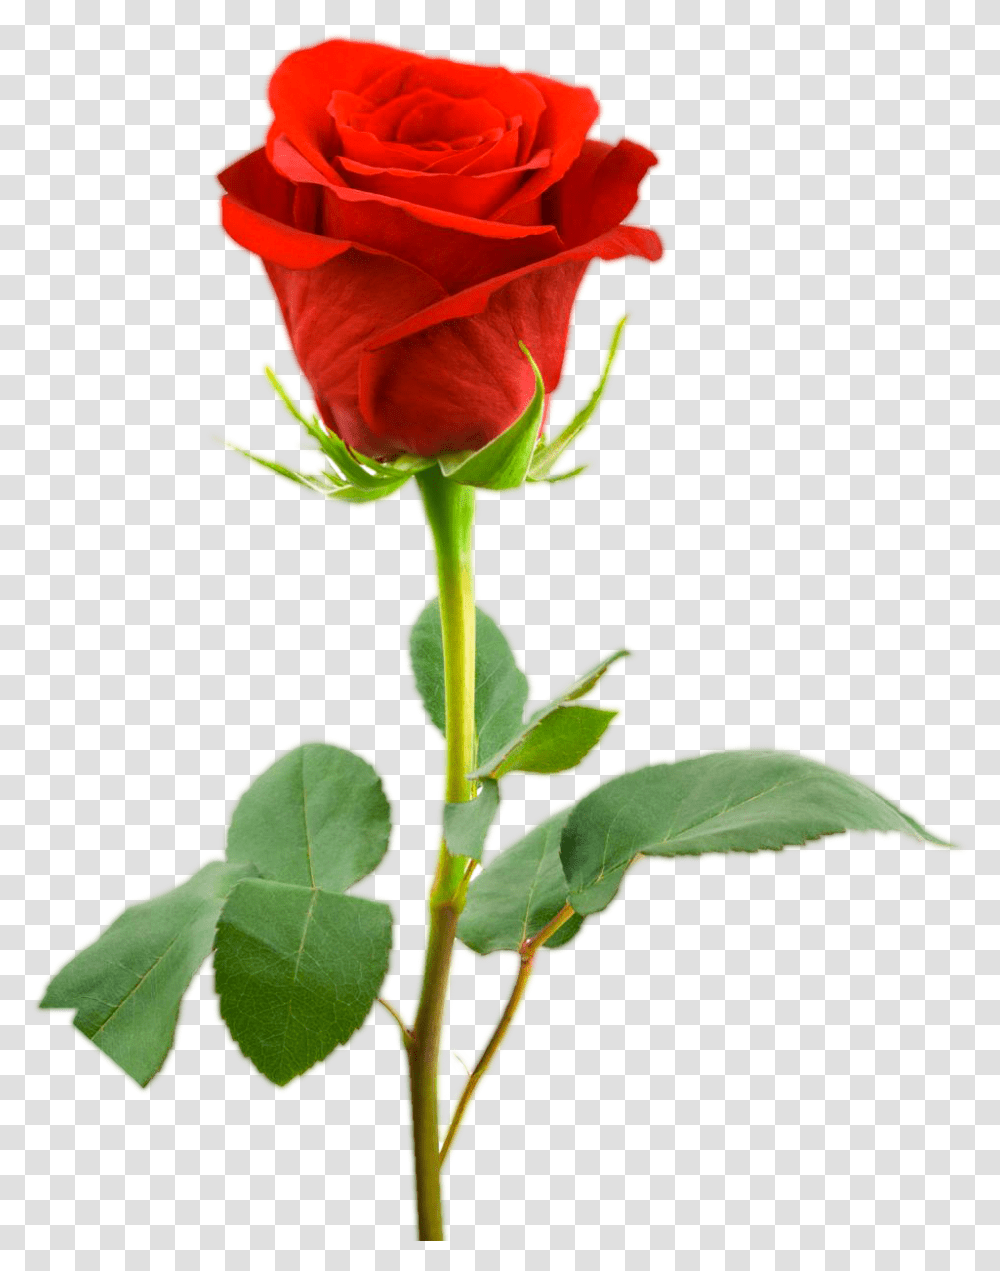 Love Red Rose Images Rose Images Full Hd, Flower, Plant, Blossom, Acanthaceae Transparent Png